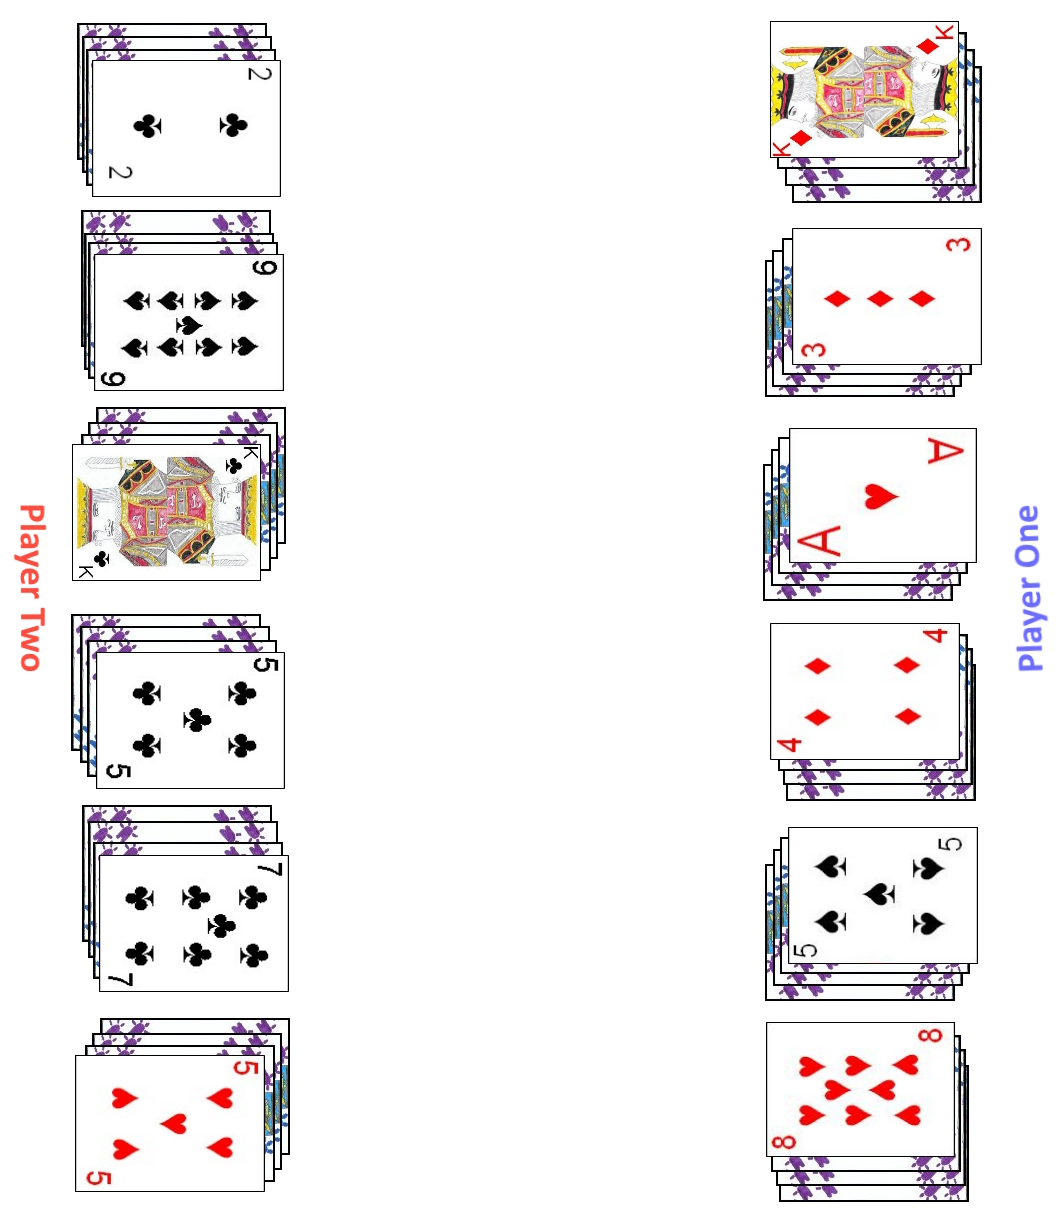 Example layout for Two-Player Manilla